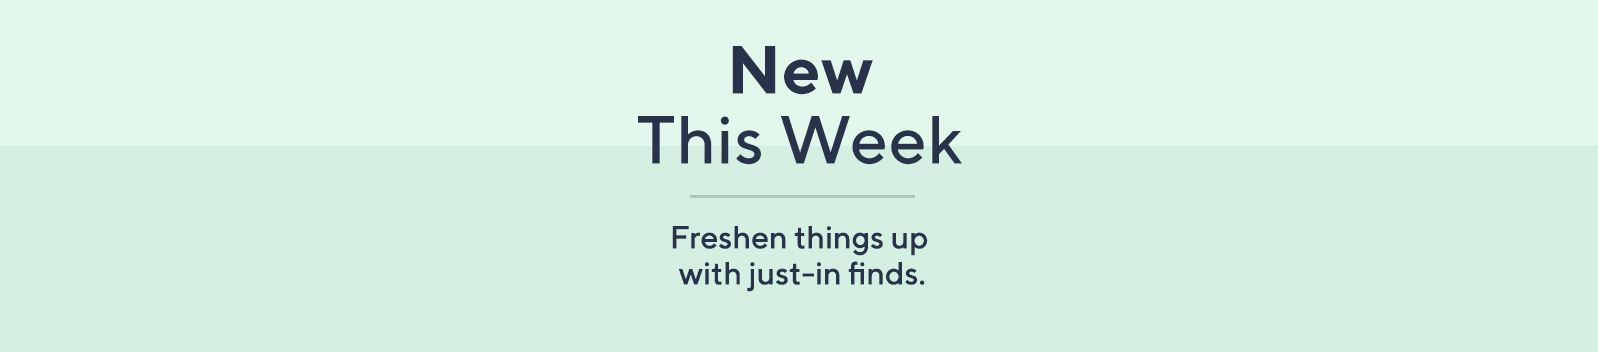 New This Week: Freshen things up with just-in finds.